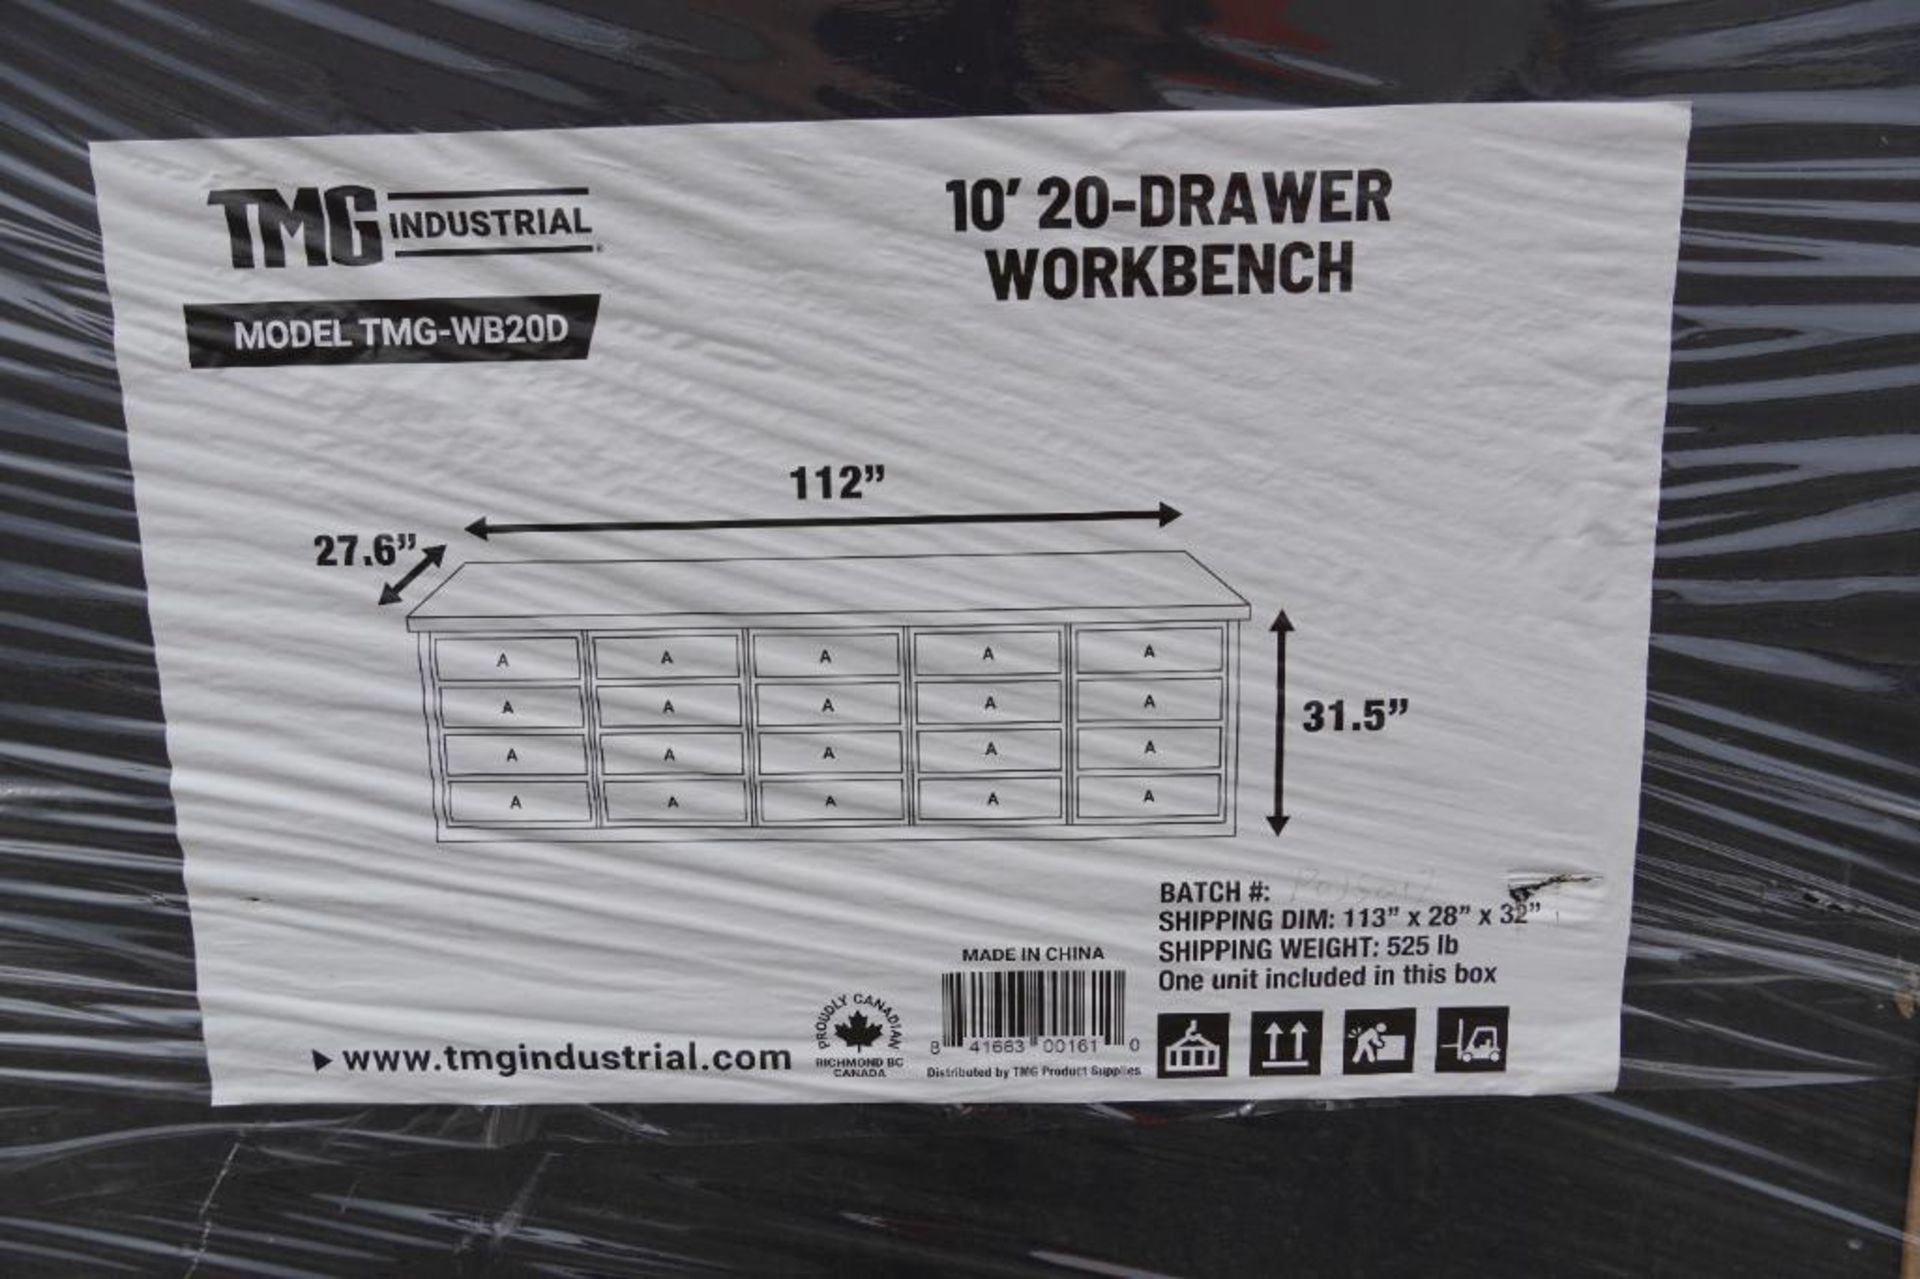 New TMG-WB20D 10' 20-Drawer Workbench - Image 5 of 6